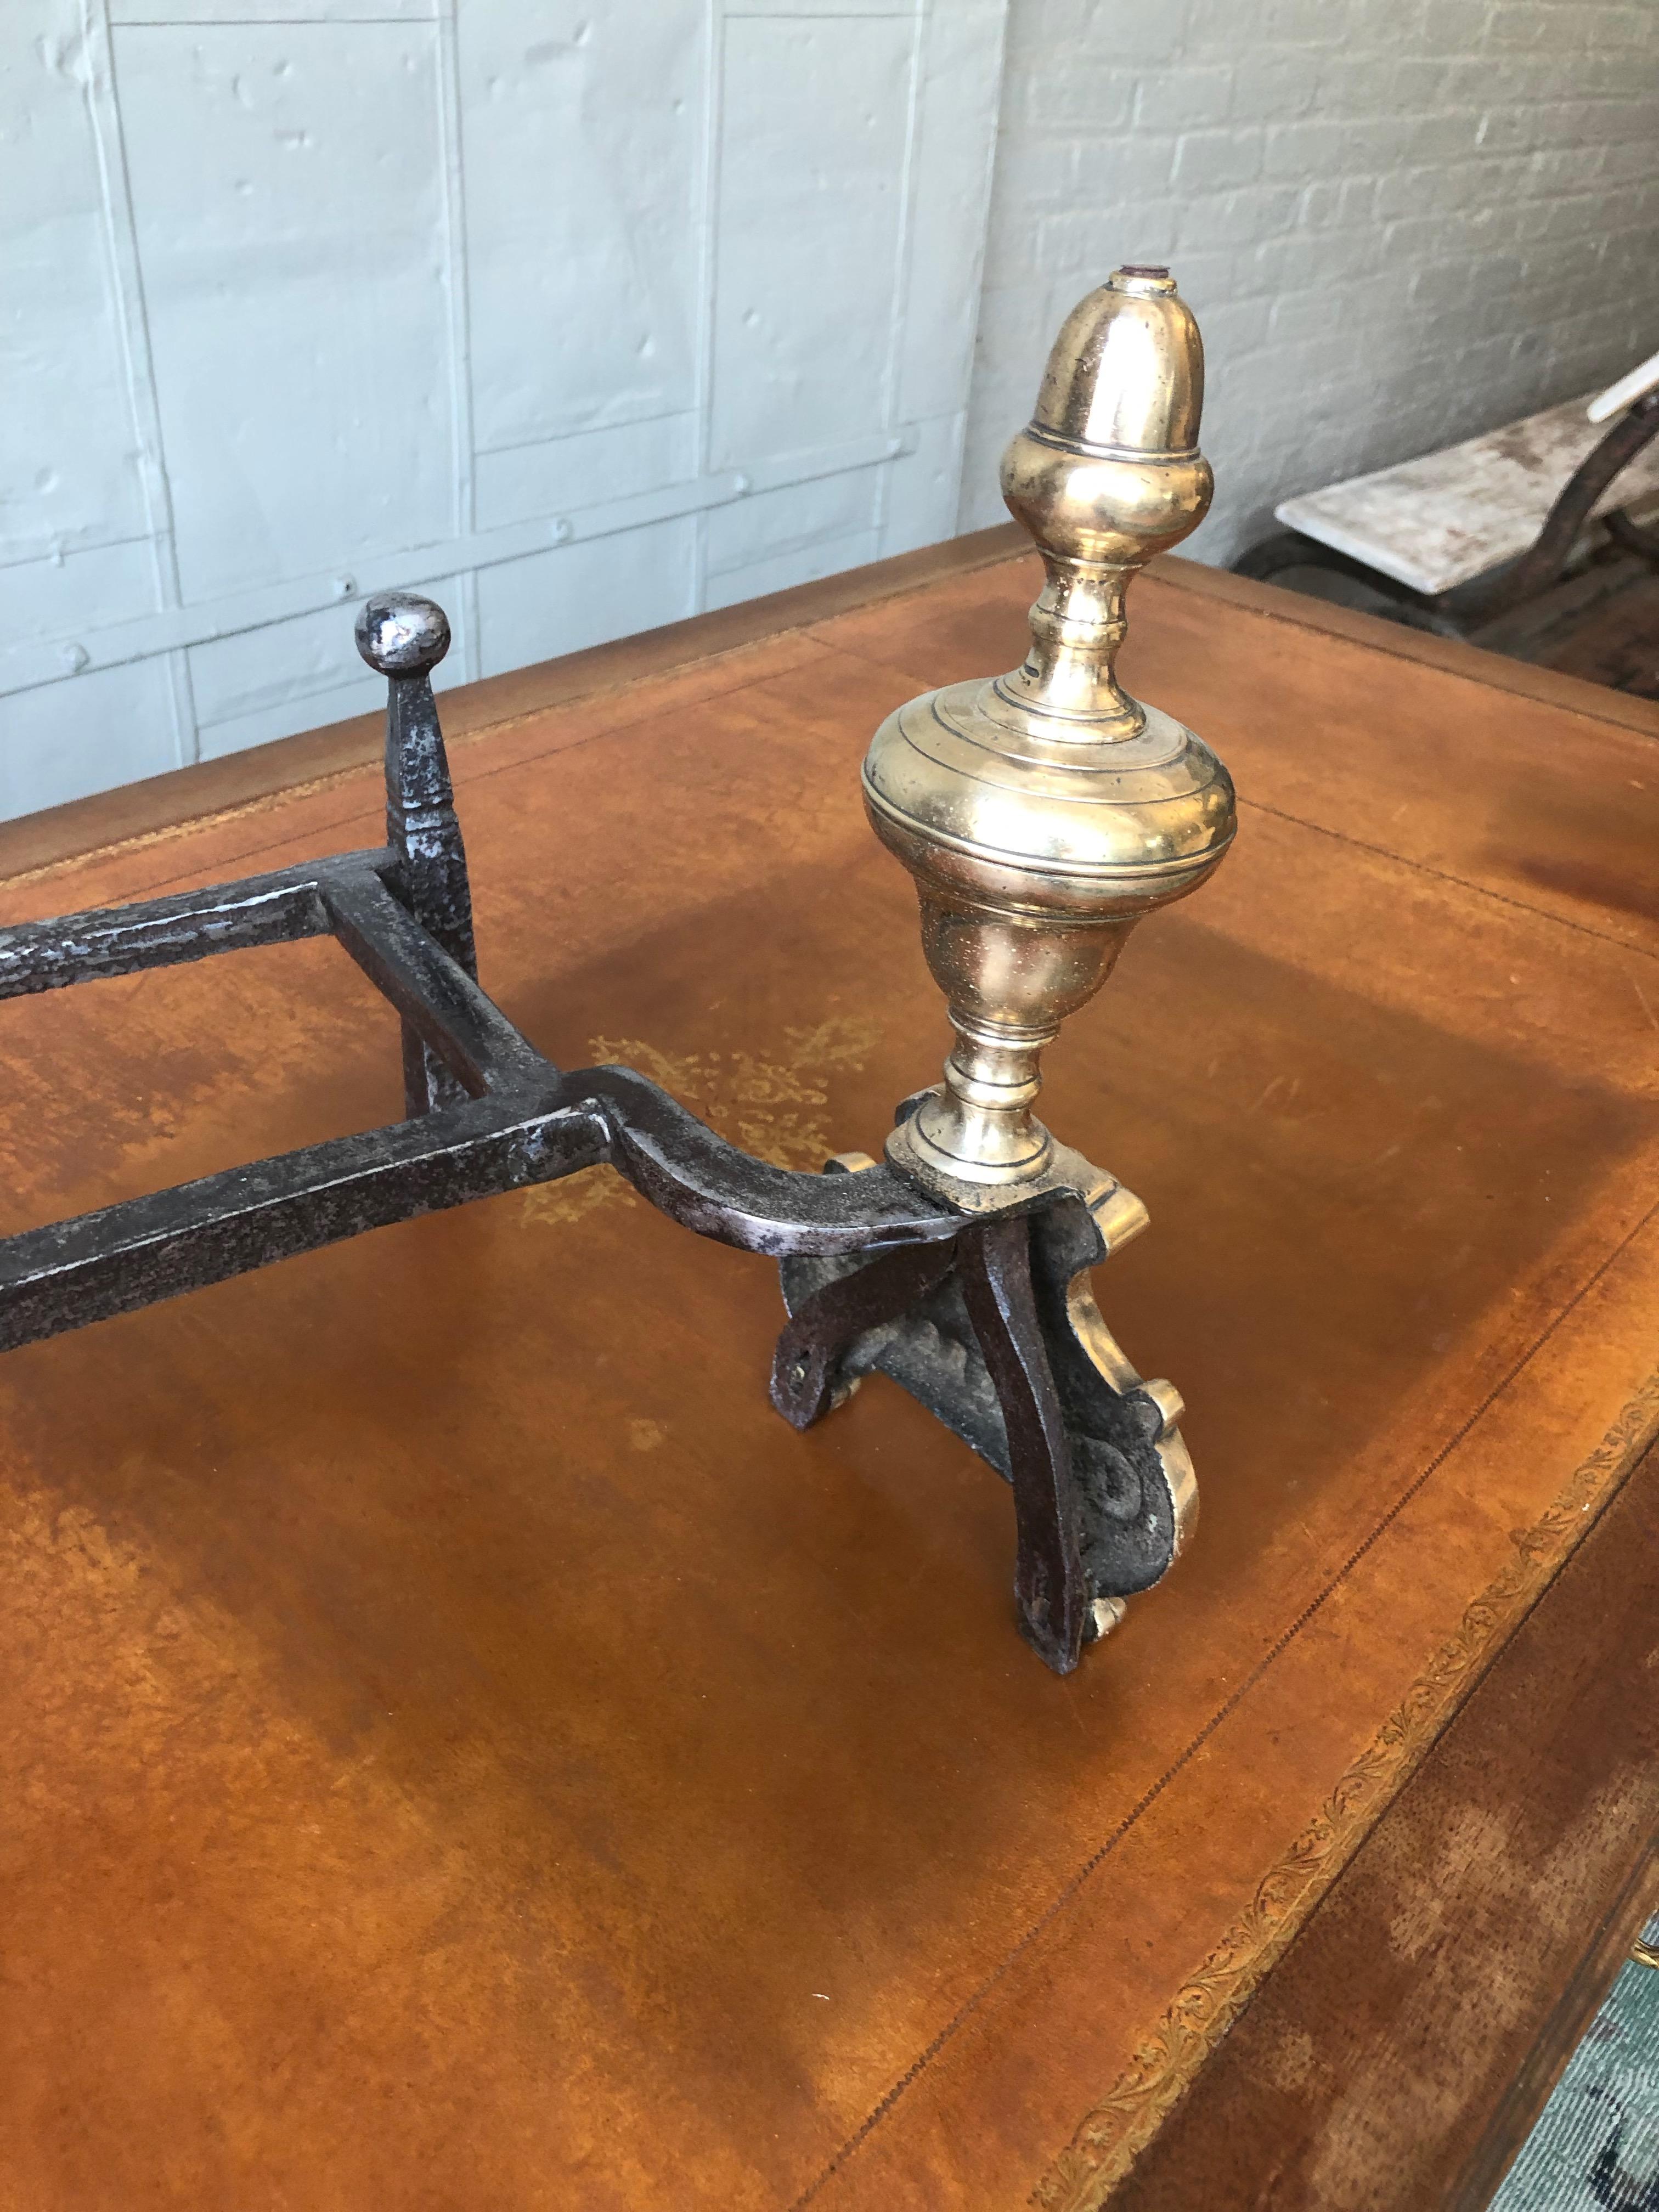 A handsome pair of late 18th-early 19th century French andirons with double iron polished supports and cast brass or bronze decorative fronts. The andirons have recently been polished.

Ref #: D0819-01

Dimensions: 10”H x 11”W  x 14”D

    